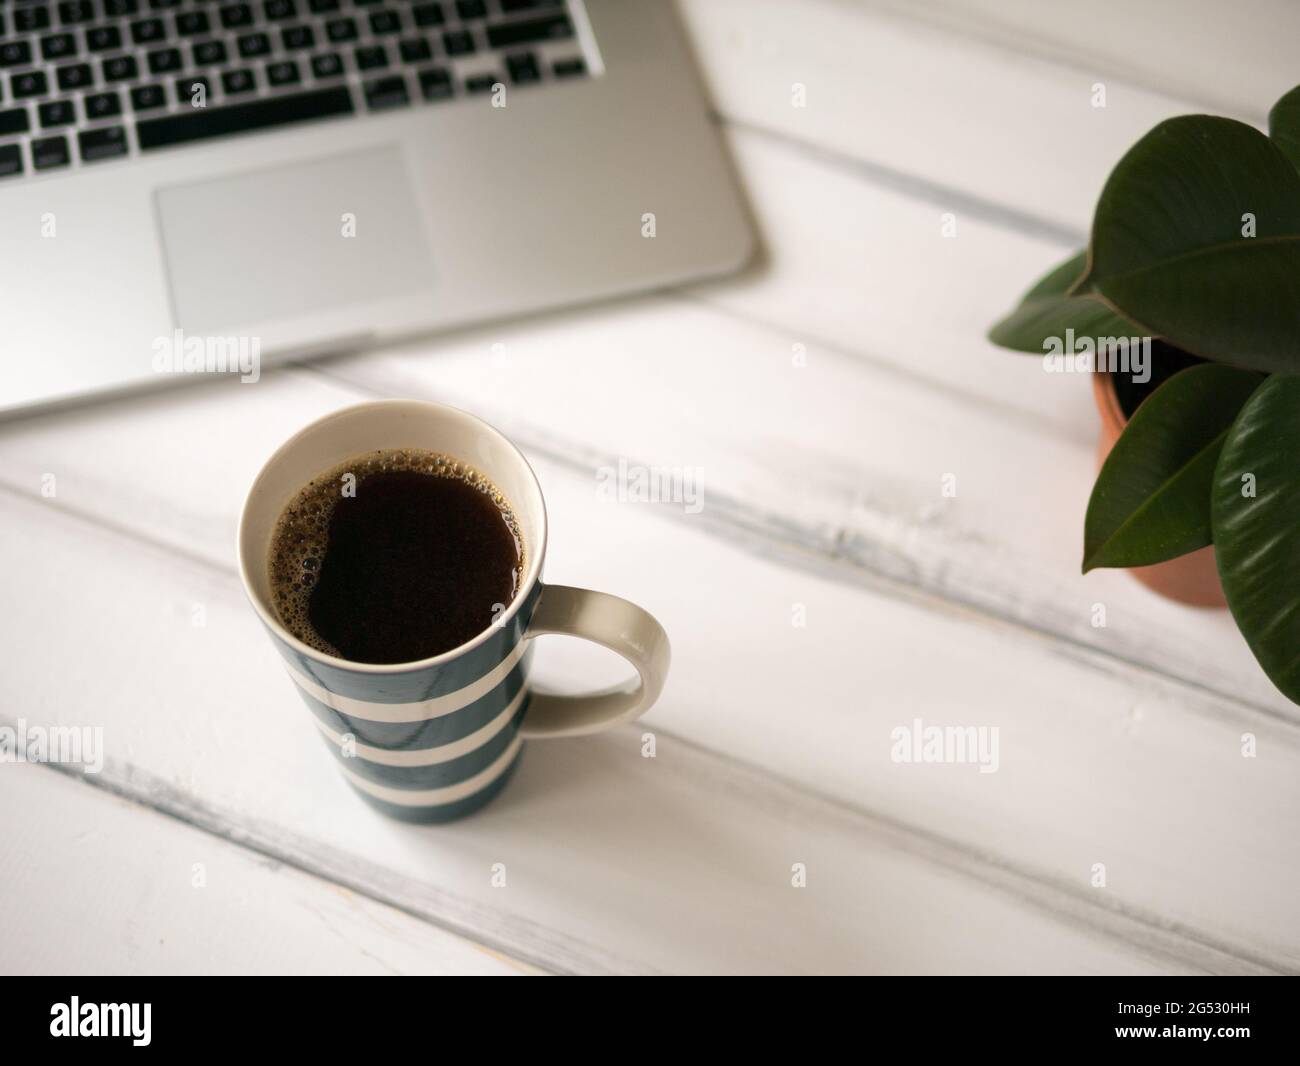 White wooden working desk with notebook and large mug of coffee Stock Photo